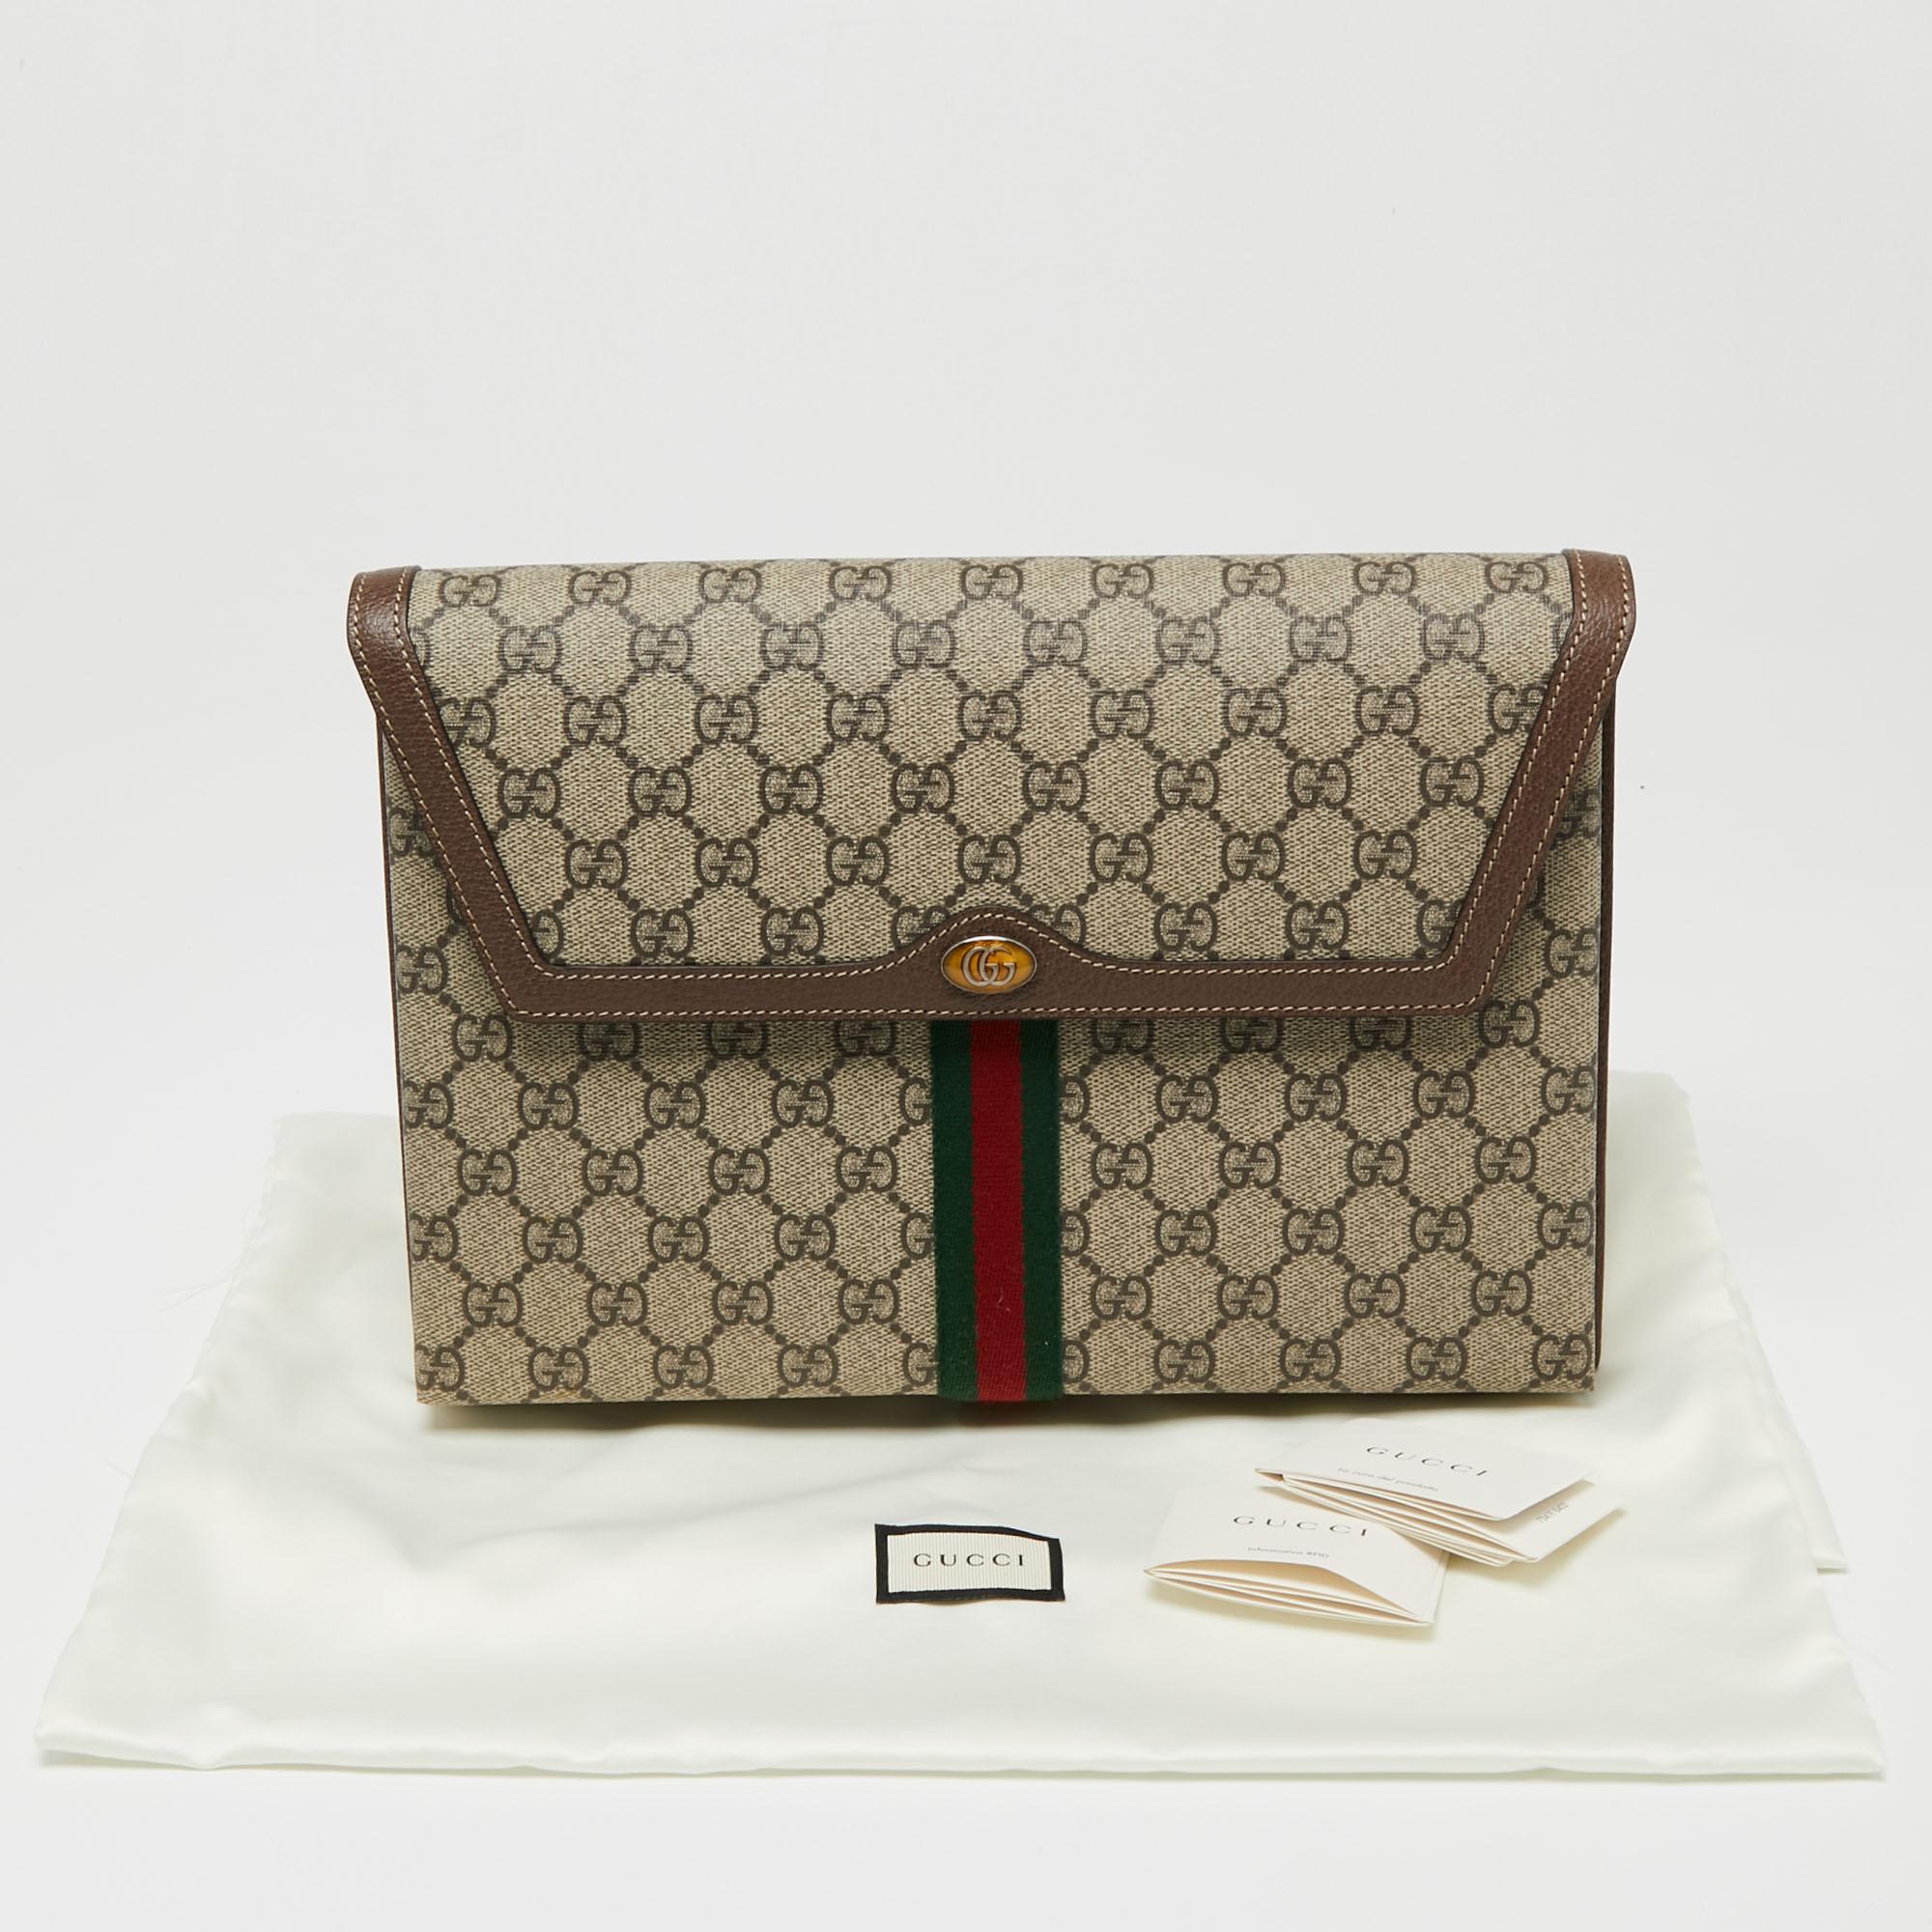 Gucci Beige/Brown GG Supreme Canvas and Leather Ophidia Pouch 5